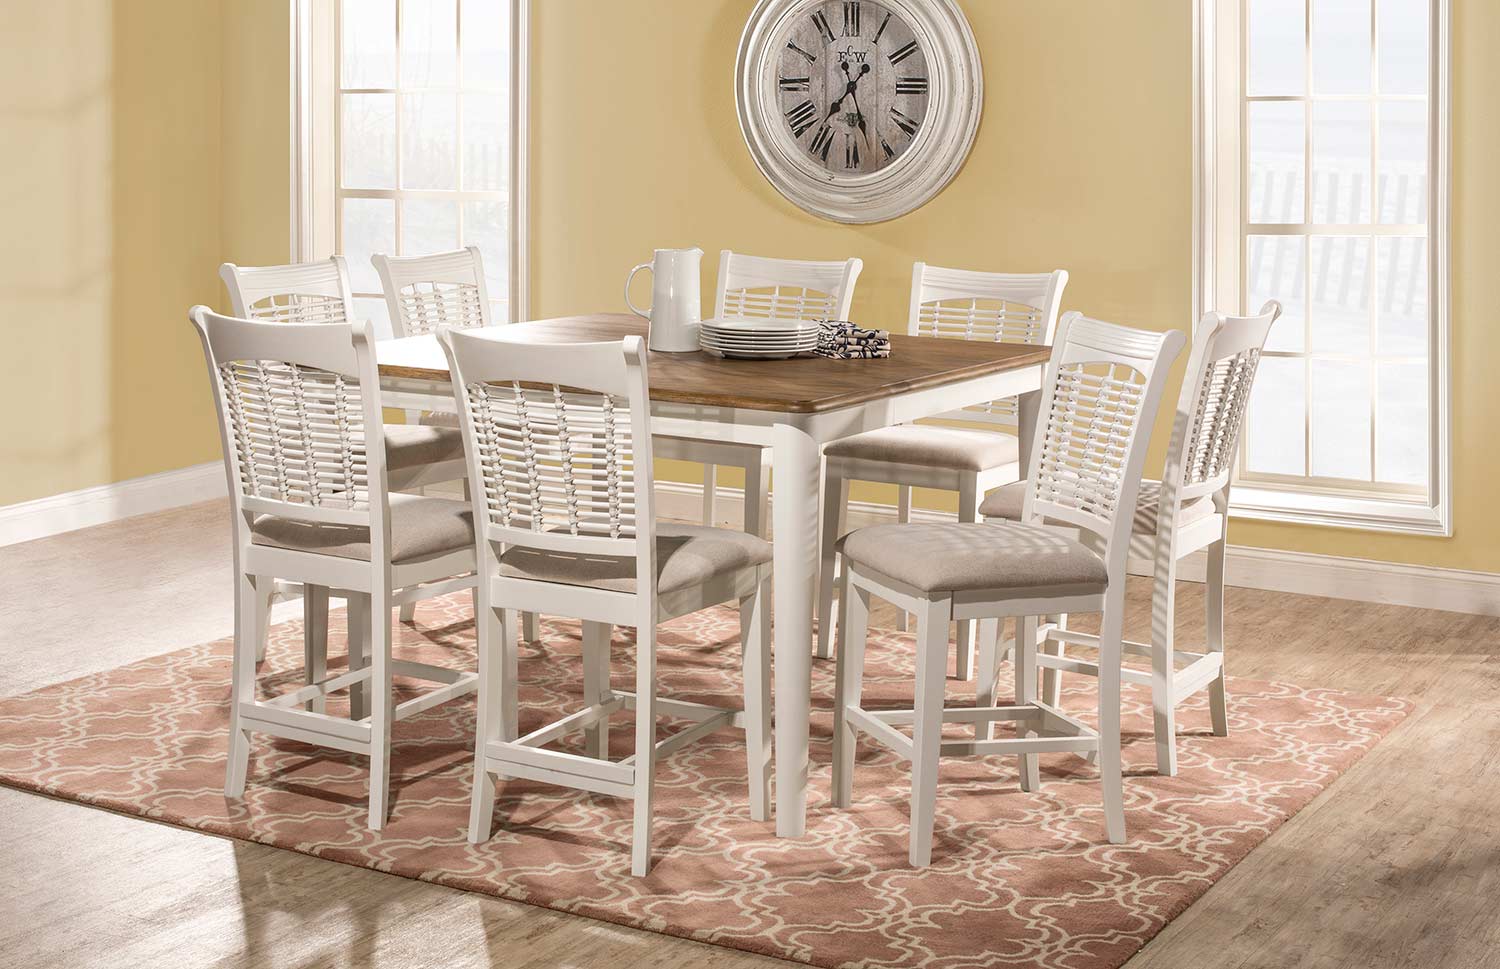 Hillsdale Bayberry 9-Piece Counter Height Dining Set - White/Driftwood